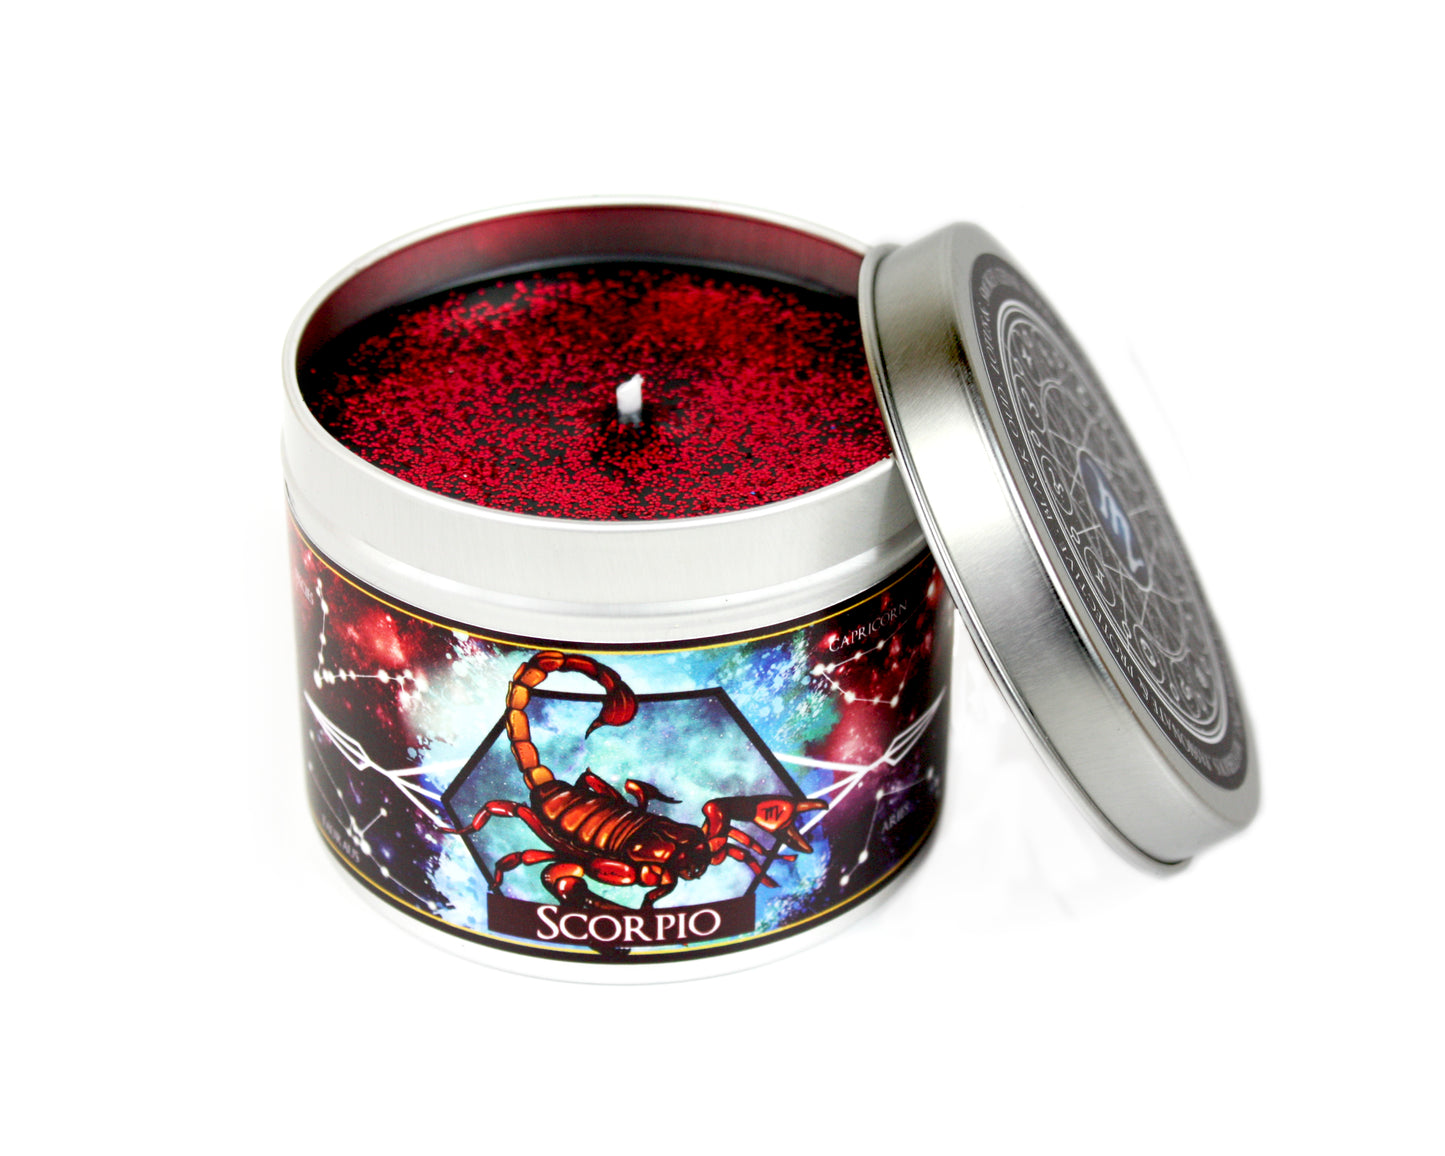 Scorpio zodiac scented candle with lid off and red glitter.